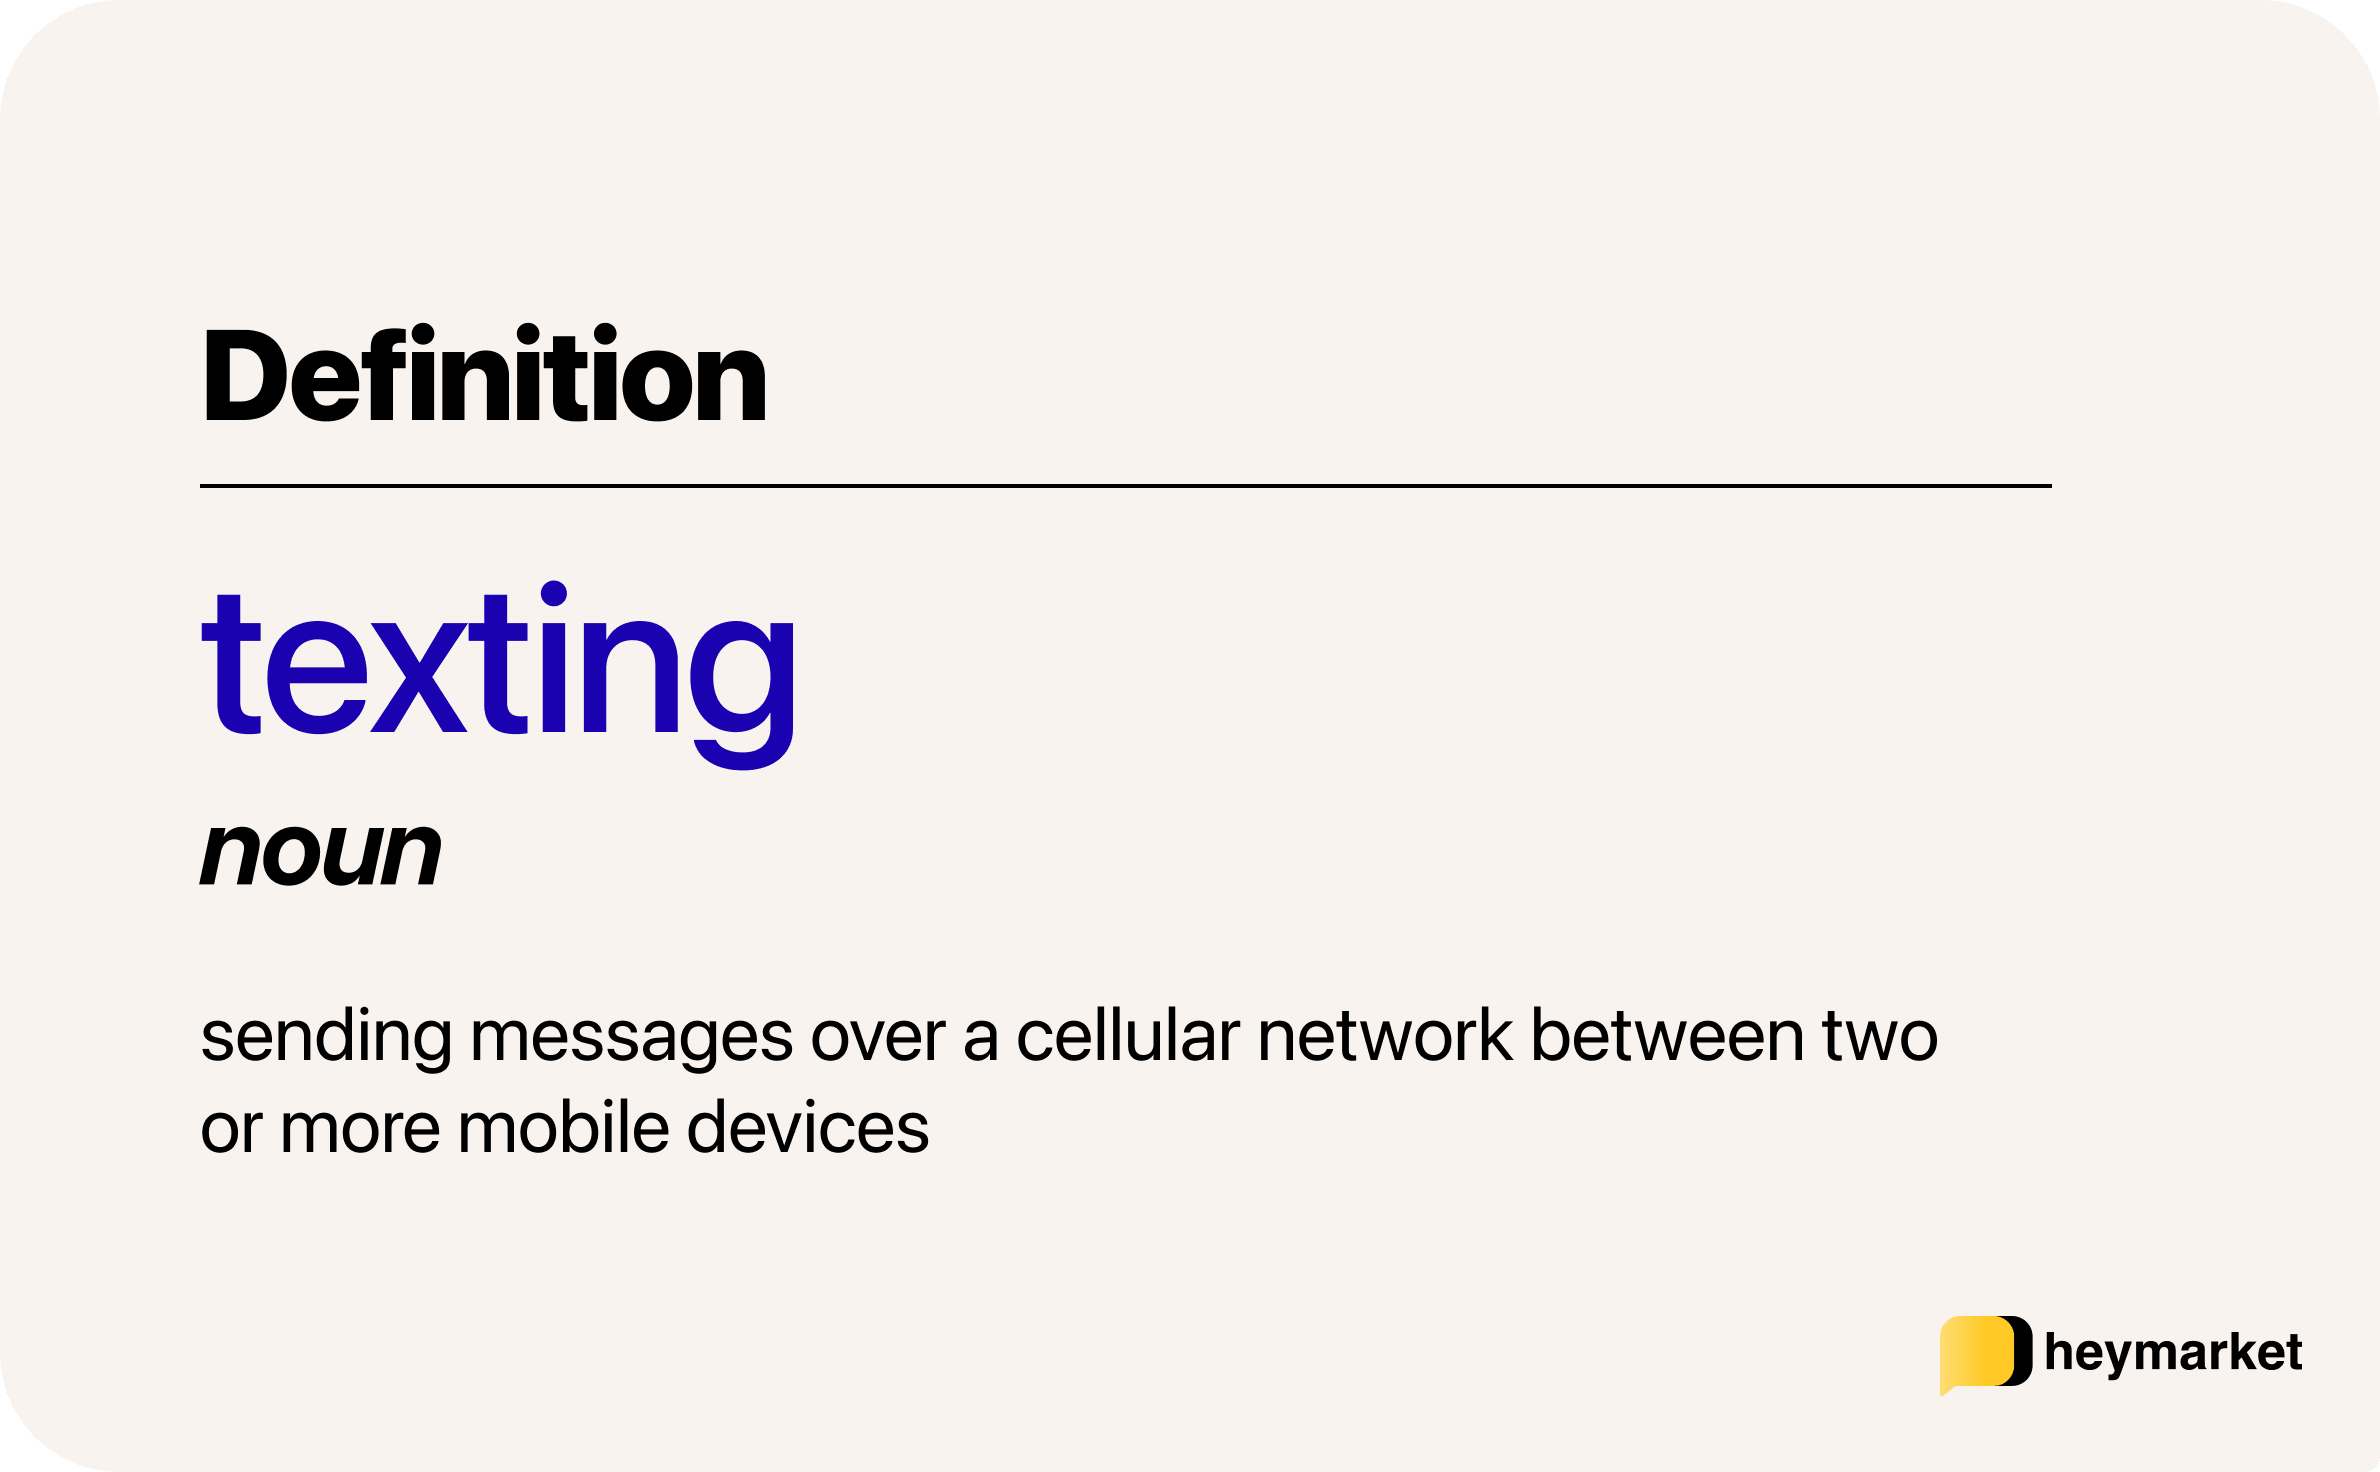 Texting is sending messages over a cellular network between two or more mobile devices